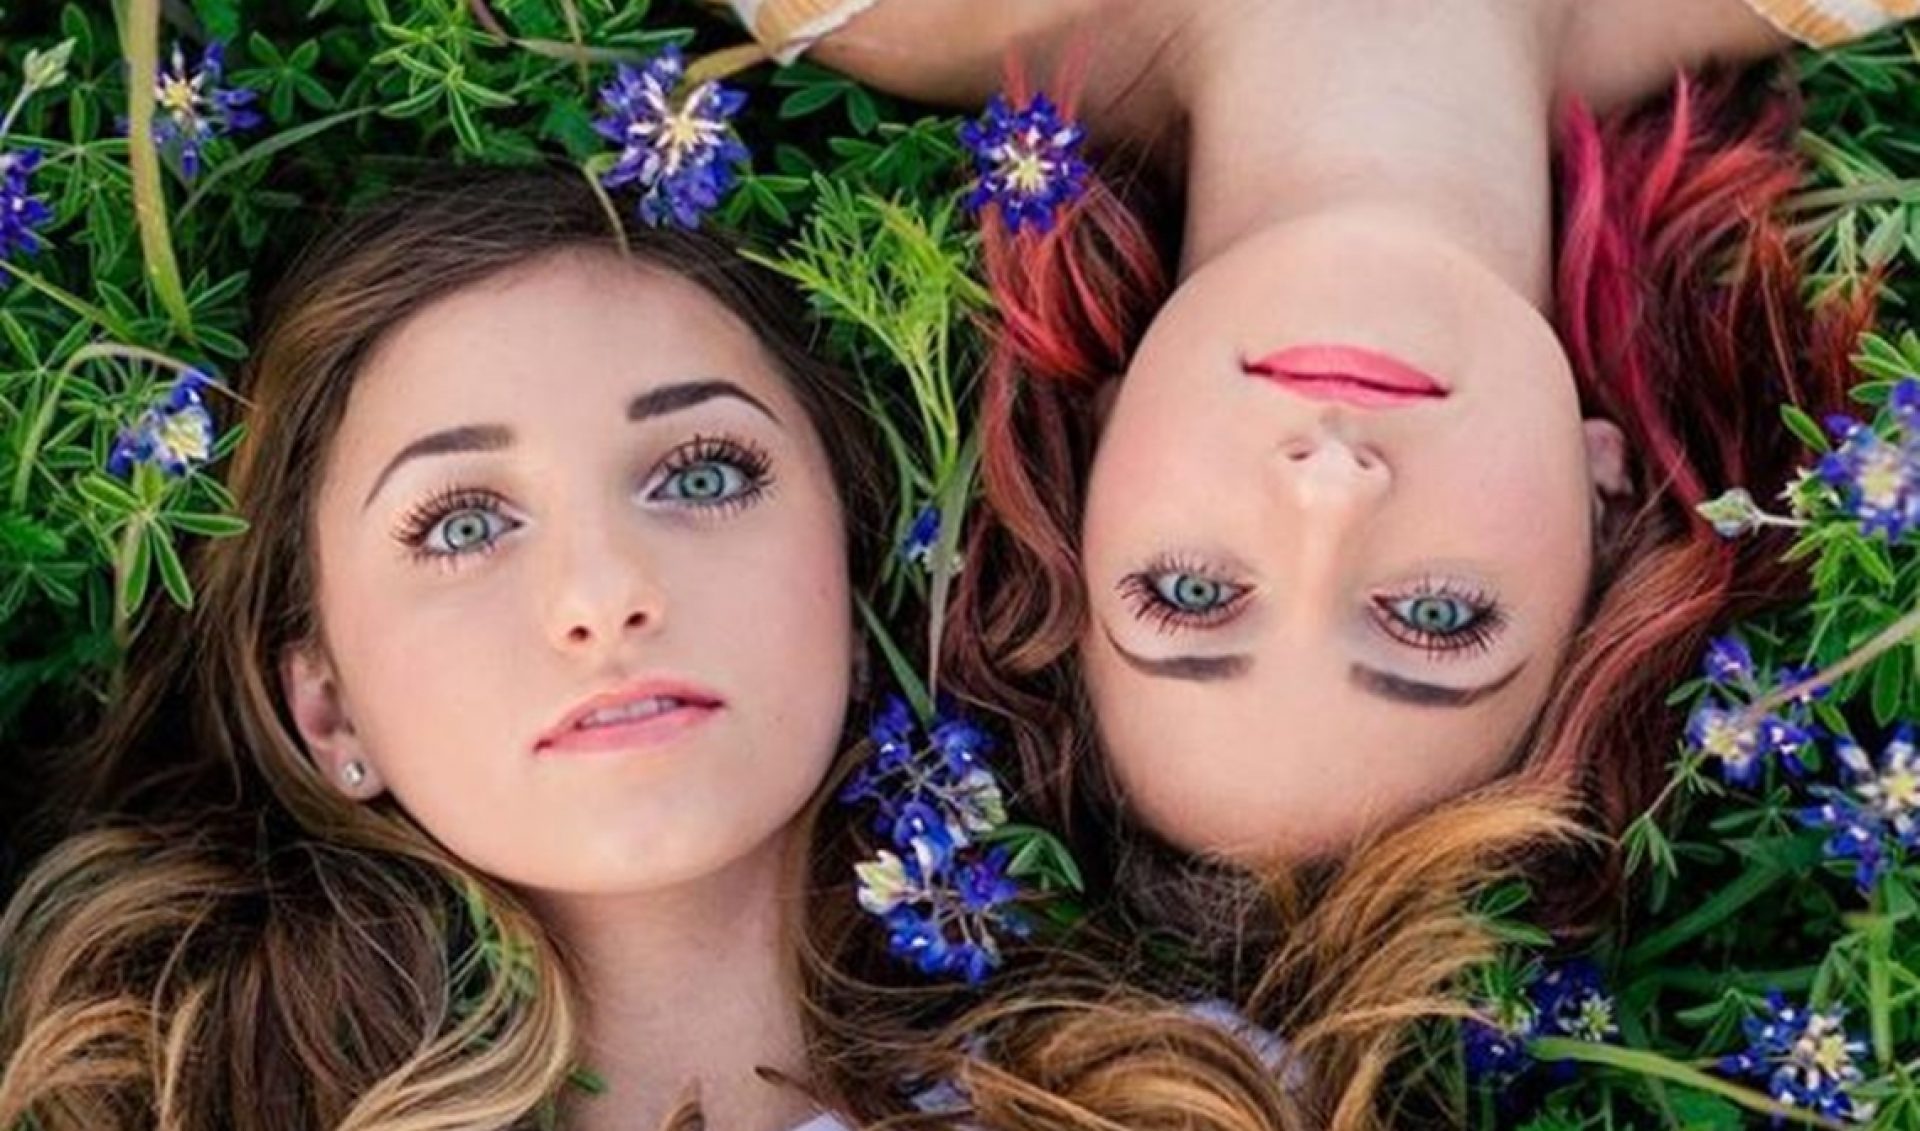 Brooklyn And Bailey Named Ambassadors For JCPenney’s ‘Arizona’ Fashion Brand